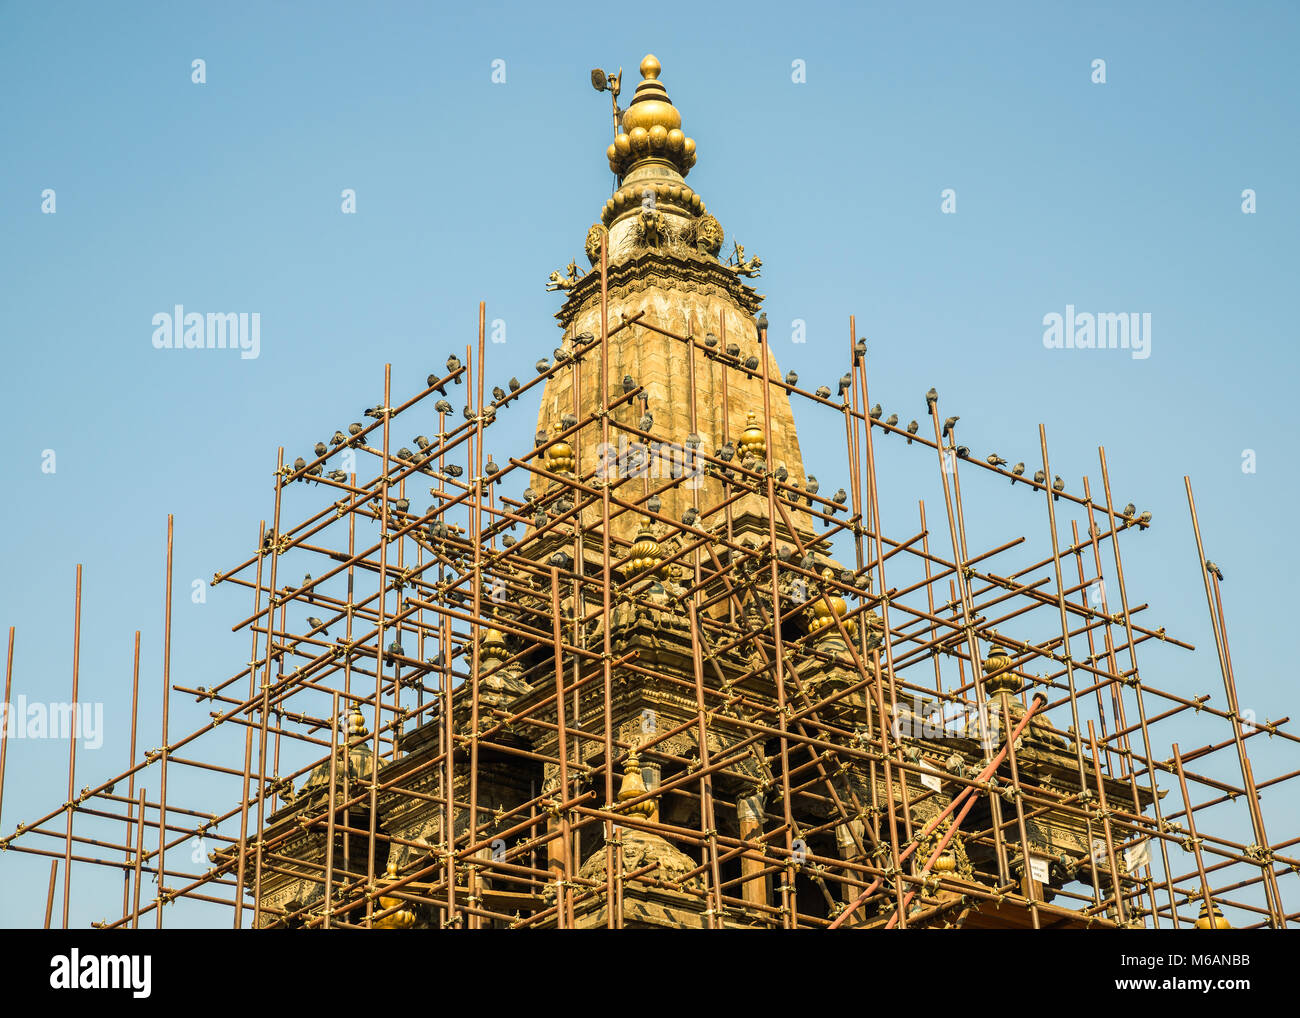 Pigeons on some scaffolding around Krishna temple on Patan Durbar Square, in Patan, Nepal. The temple was damaged by the April 2015 Nepal earthquake. Stock Photo